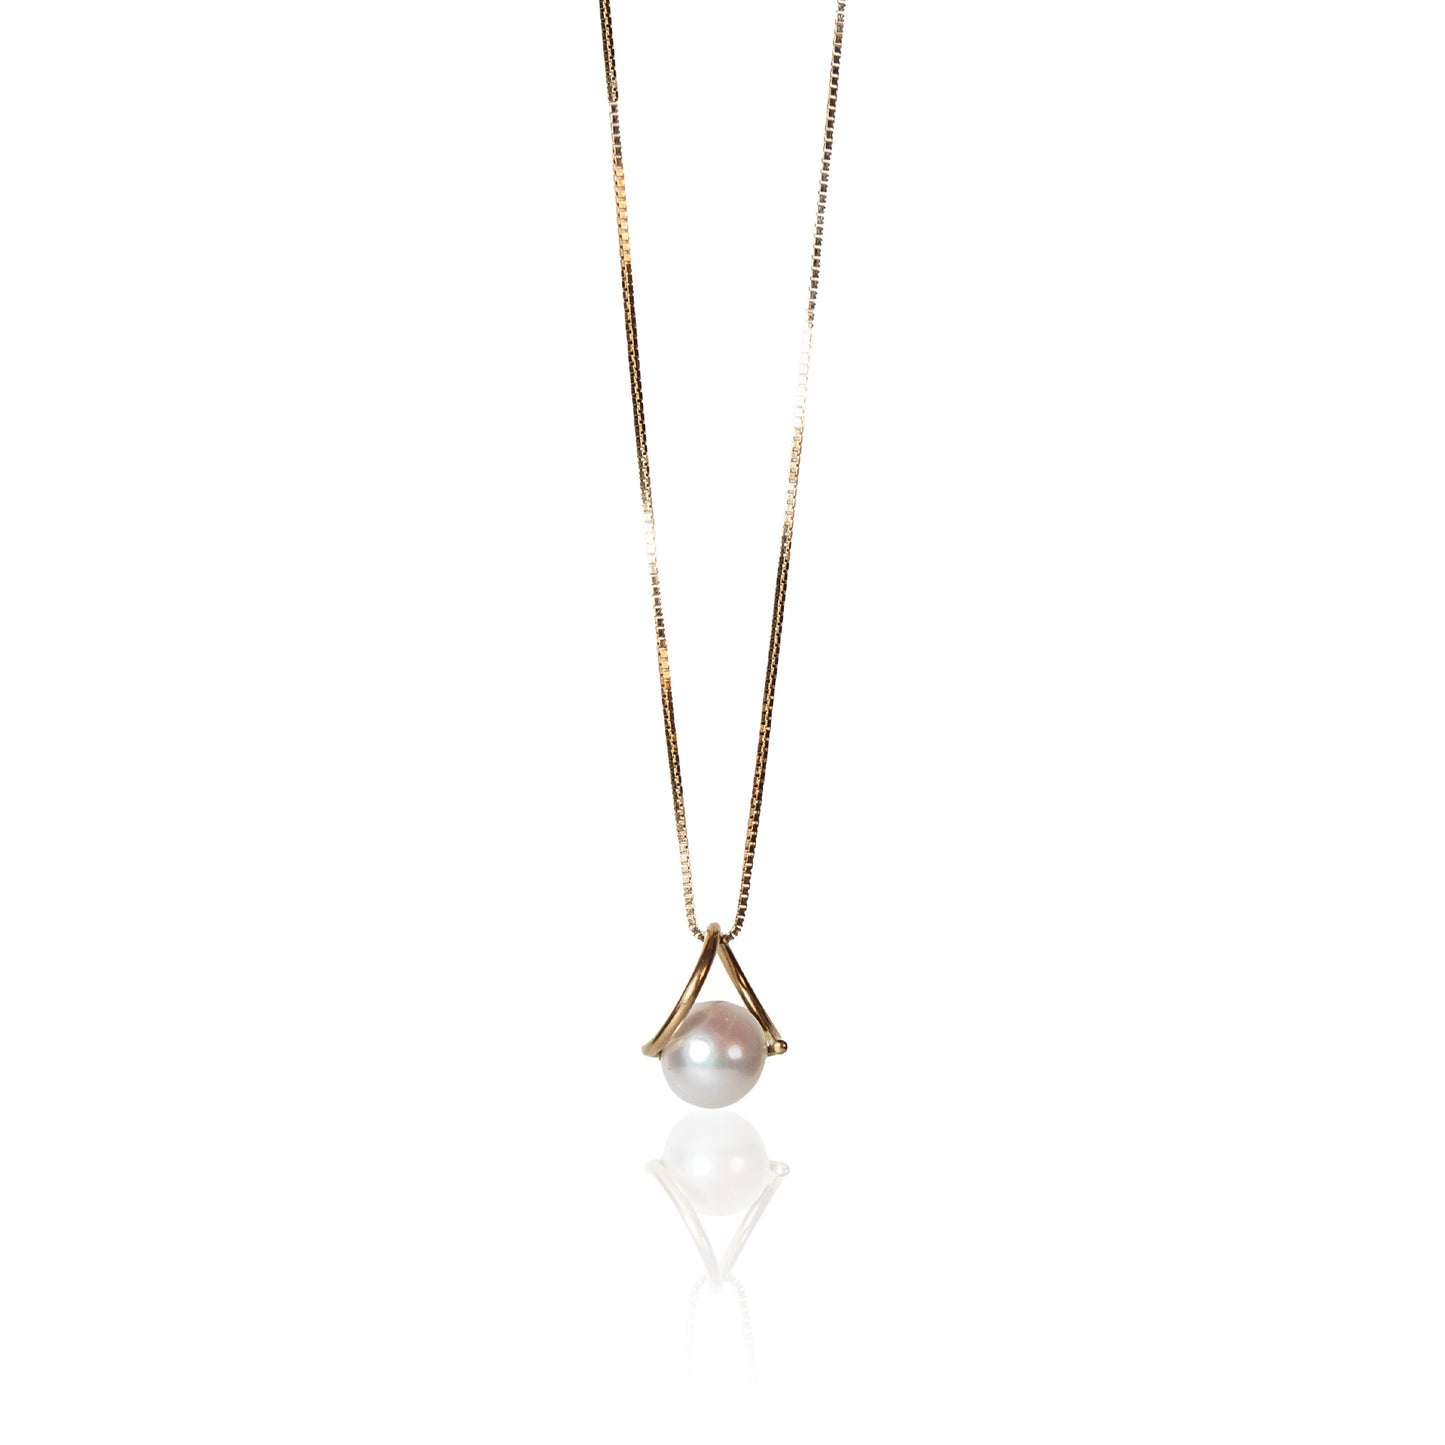 Single freshwater pearl necklace on yellow gold chain